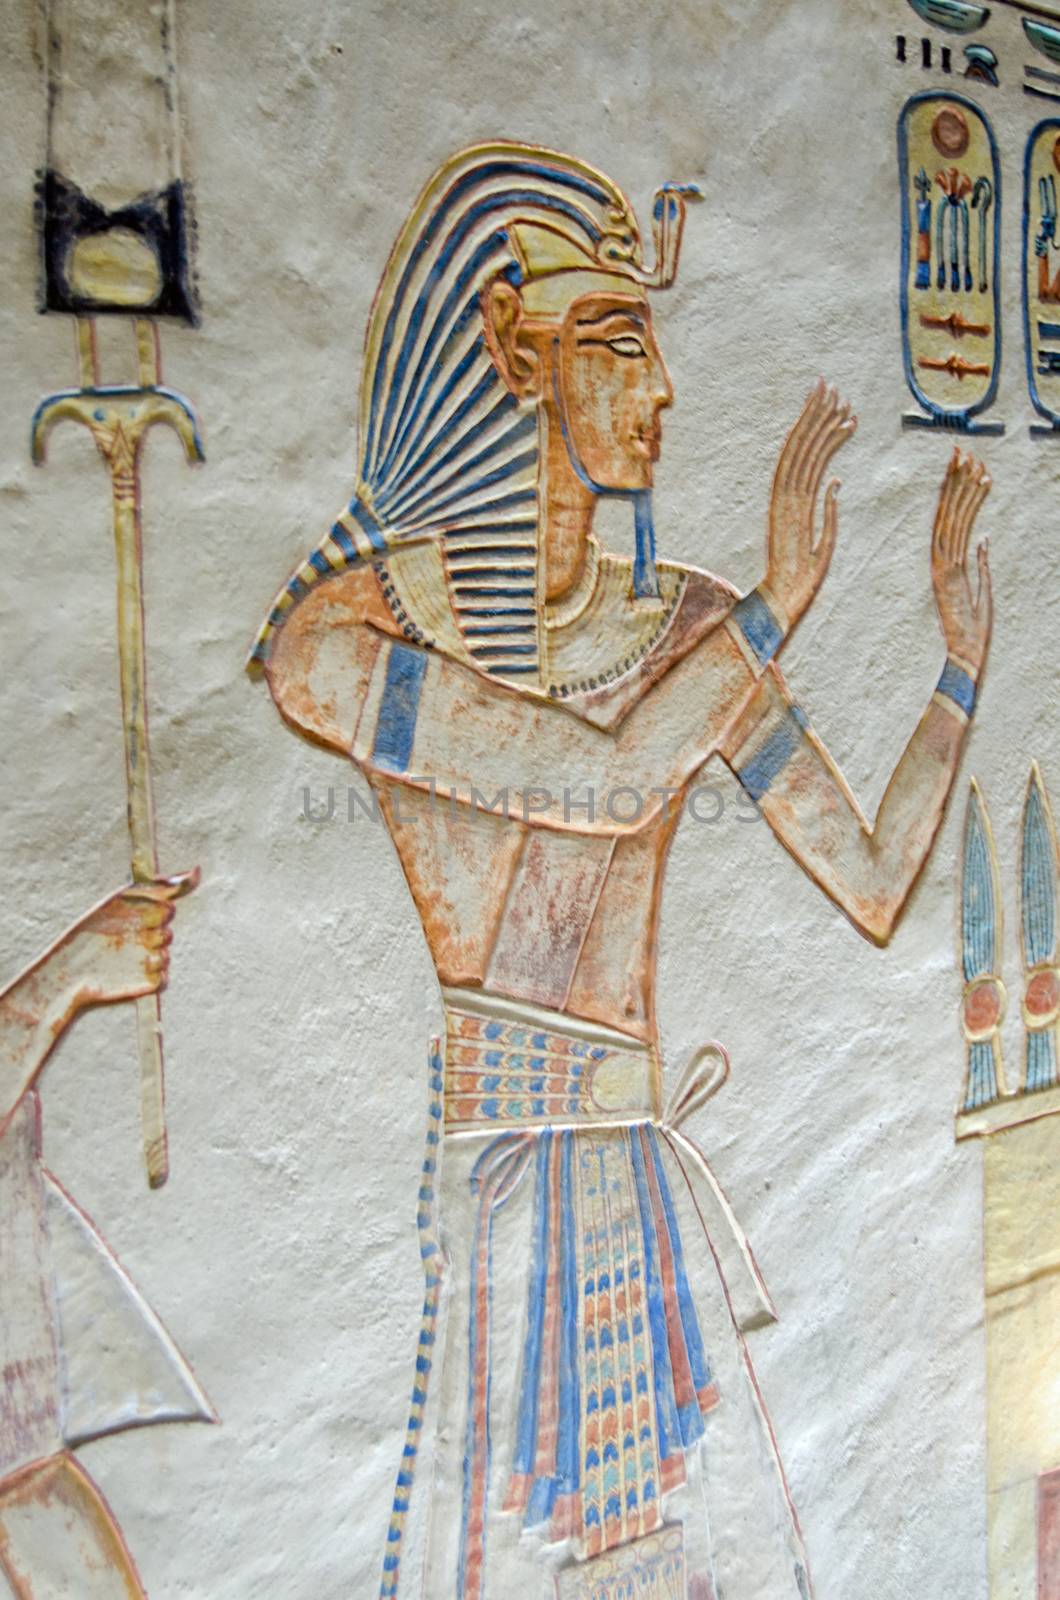 Painting on the wall of an Ancient Egyptian tomb showing the Pharaoh Ramses III praising the gods.  Tomb of Amunherkhopshef in the Valley of the Queens, thousands of years old.